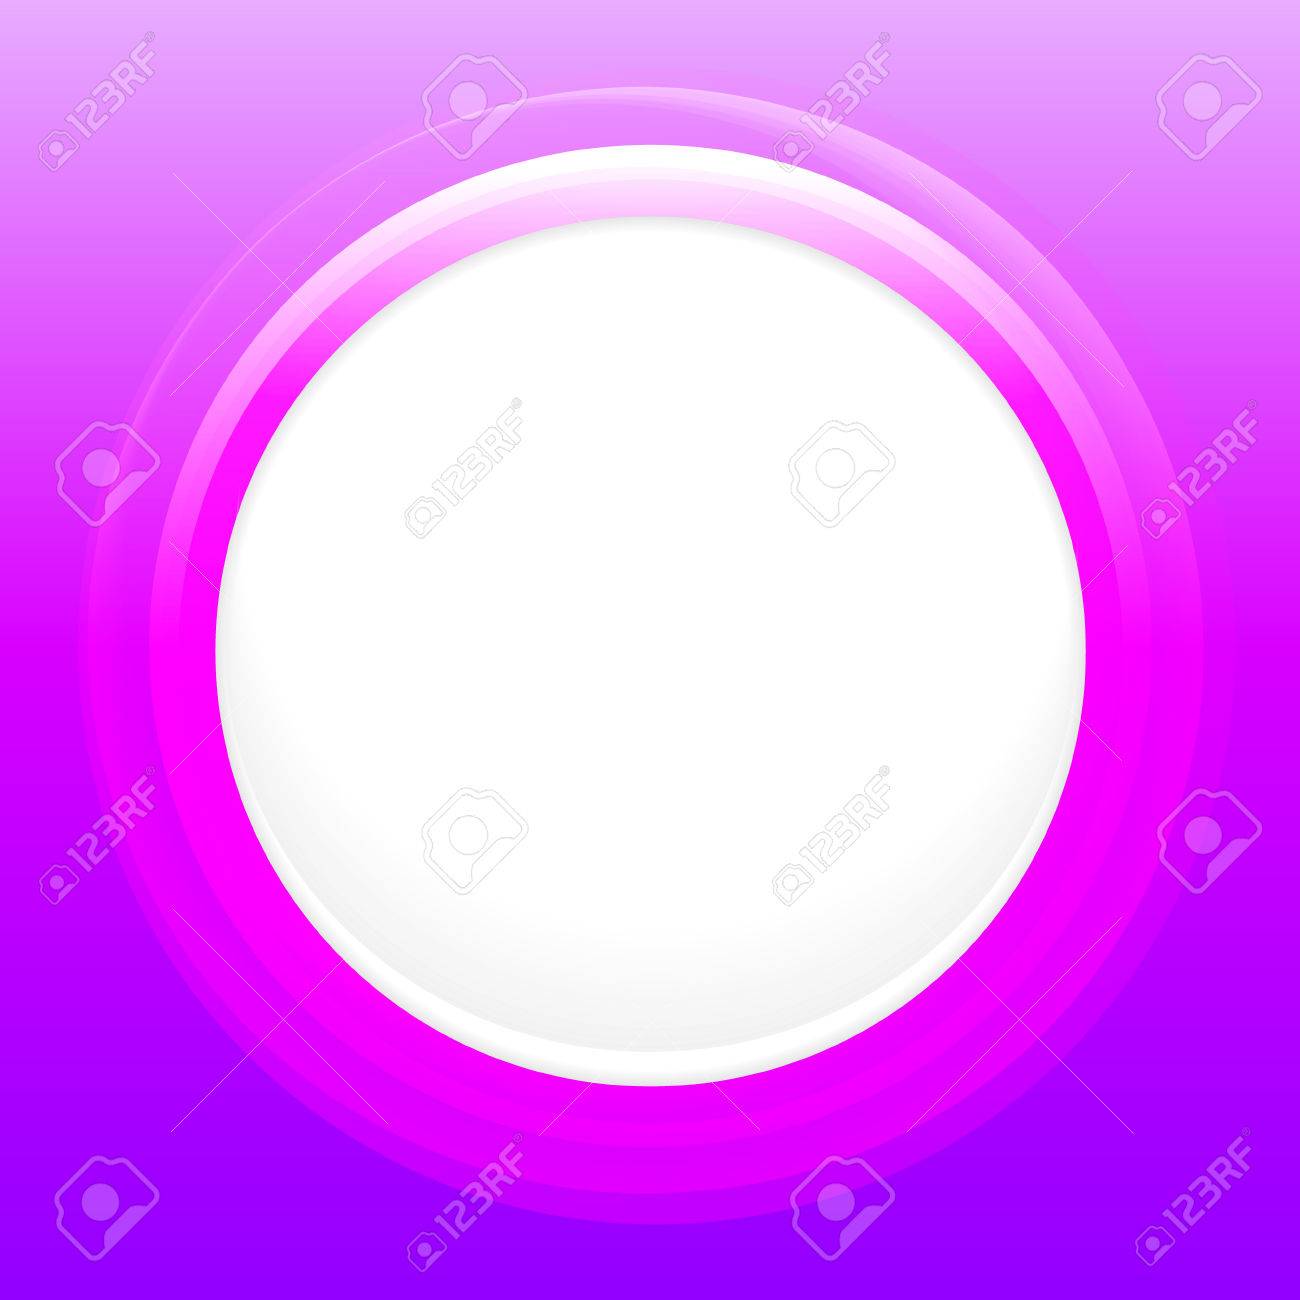 Whirlpool Colorful Smooth Twist Background With White Center